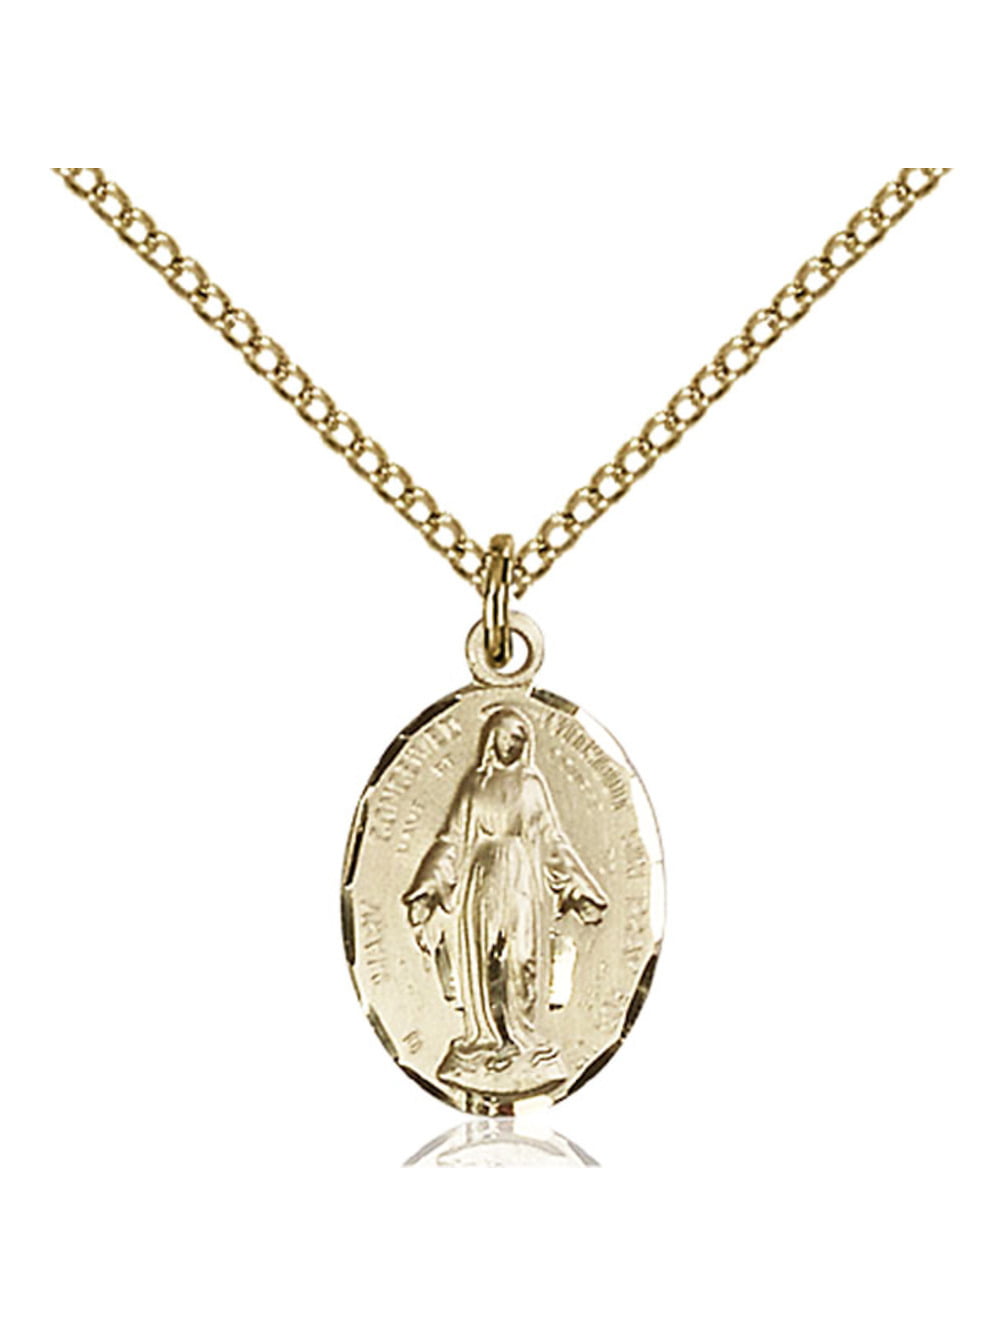 Gold Filled Immaculate Conception Pendant 5/8 x 3/8 inches with 18